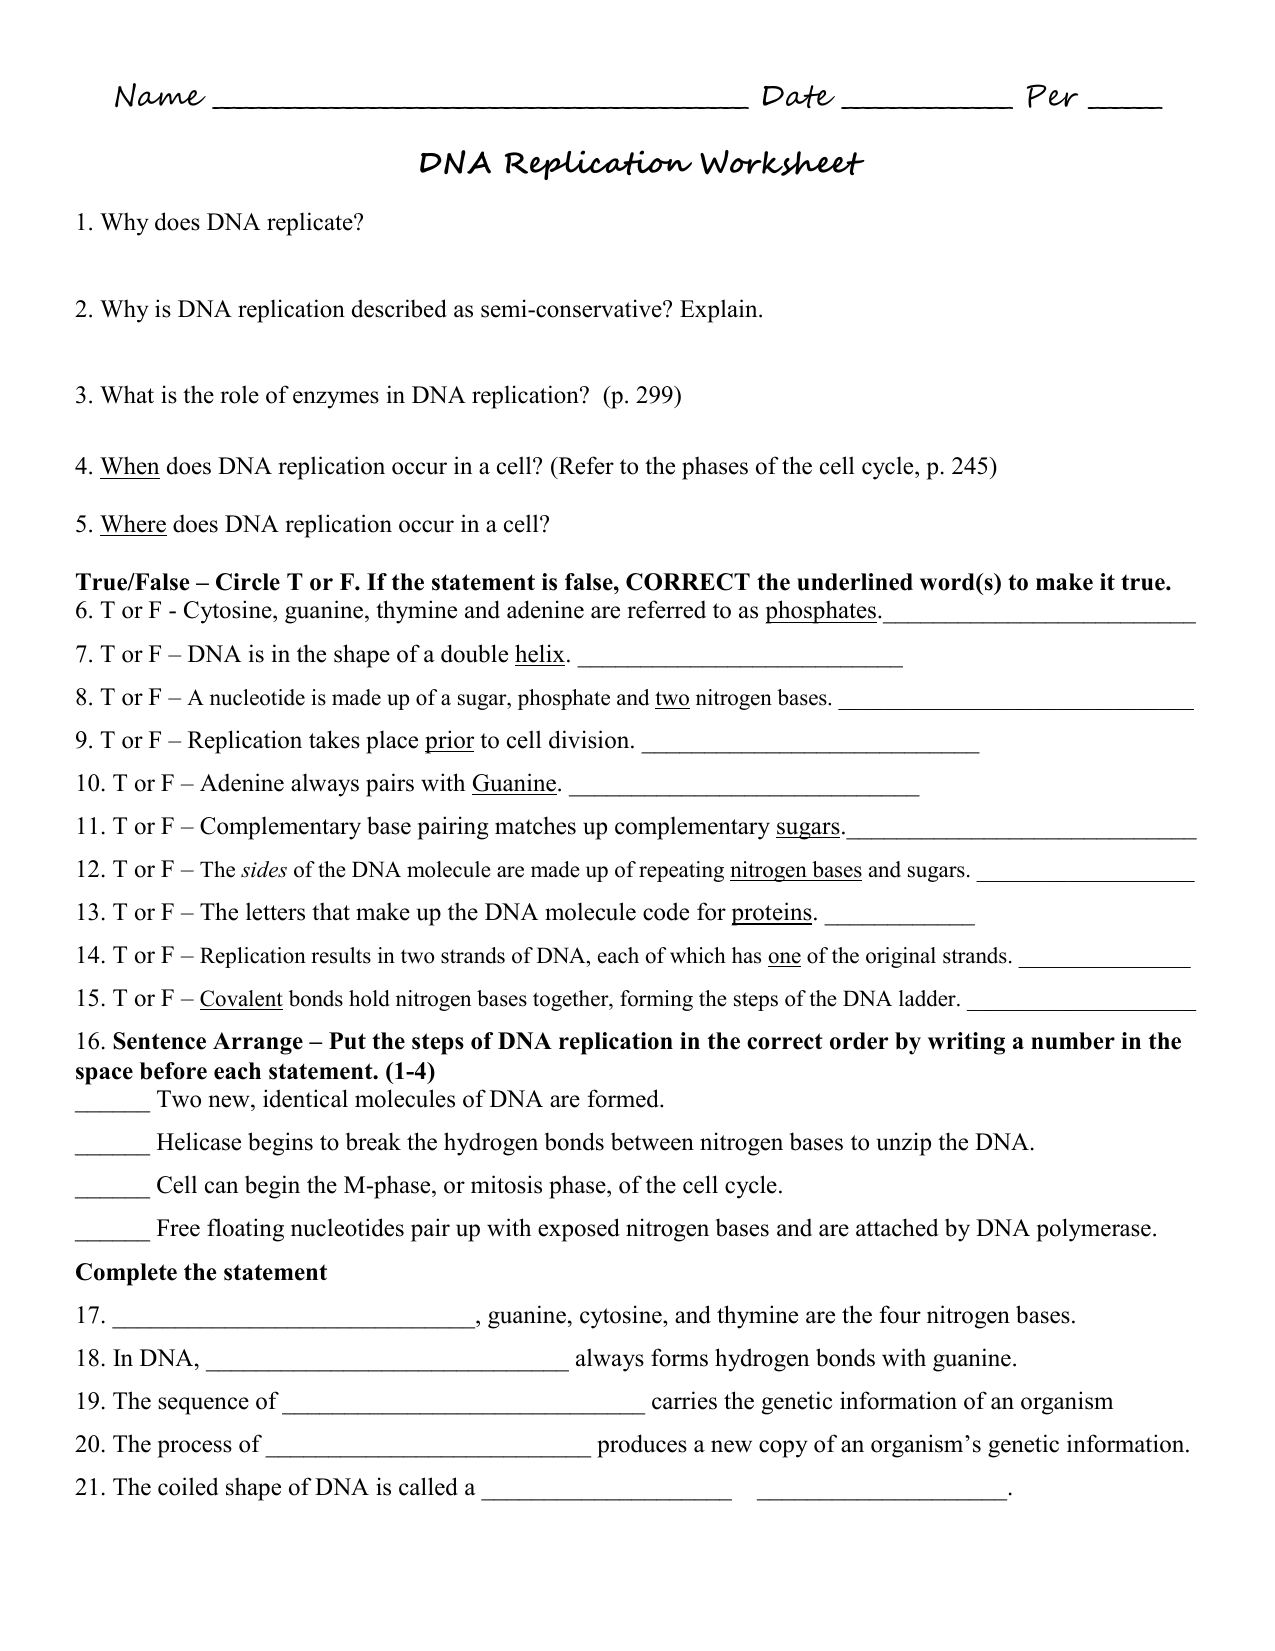 DNA Replication Worksheet Intended For Dna And Replication Worksheet Answers